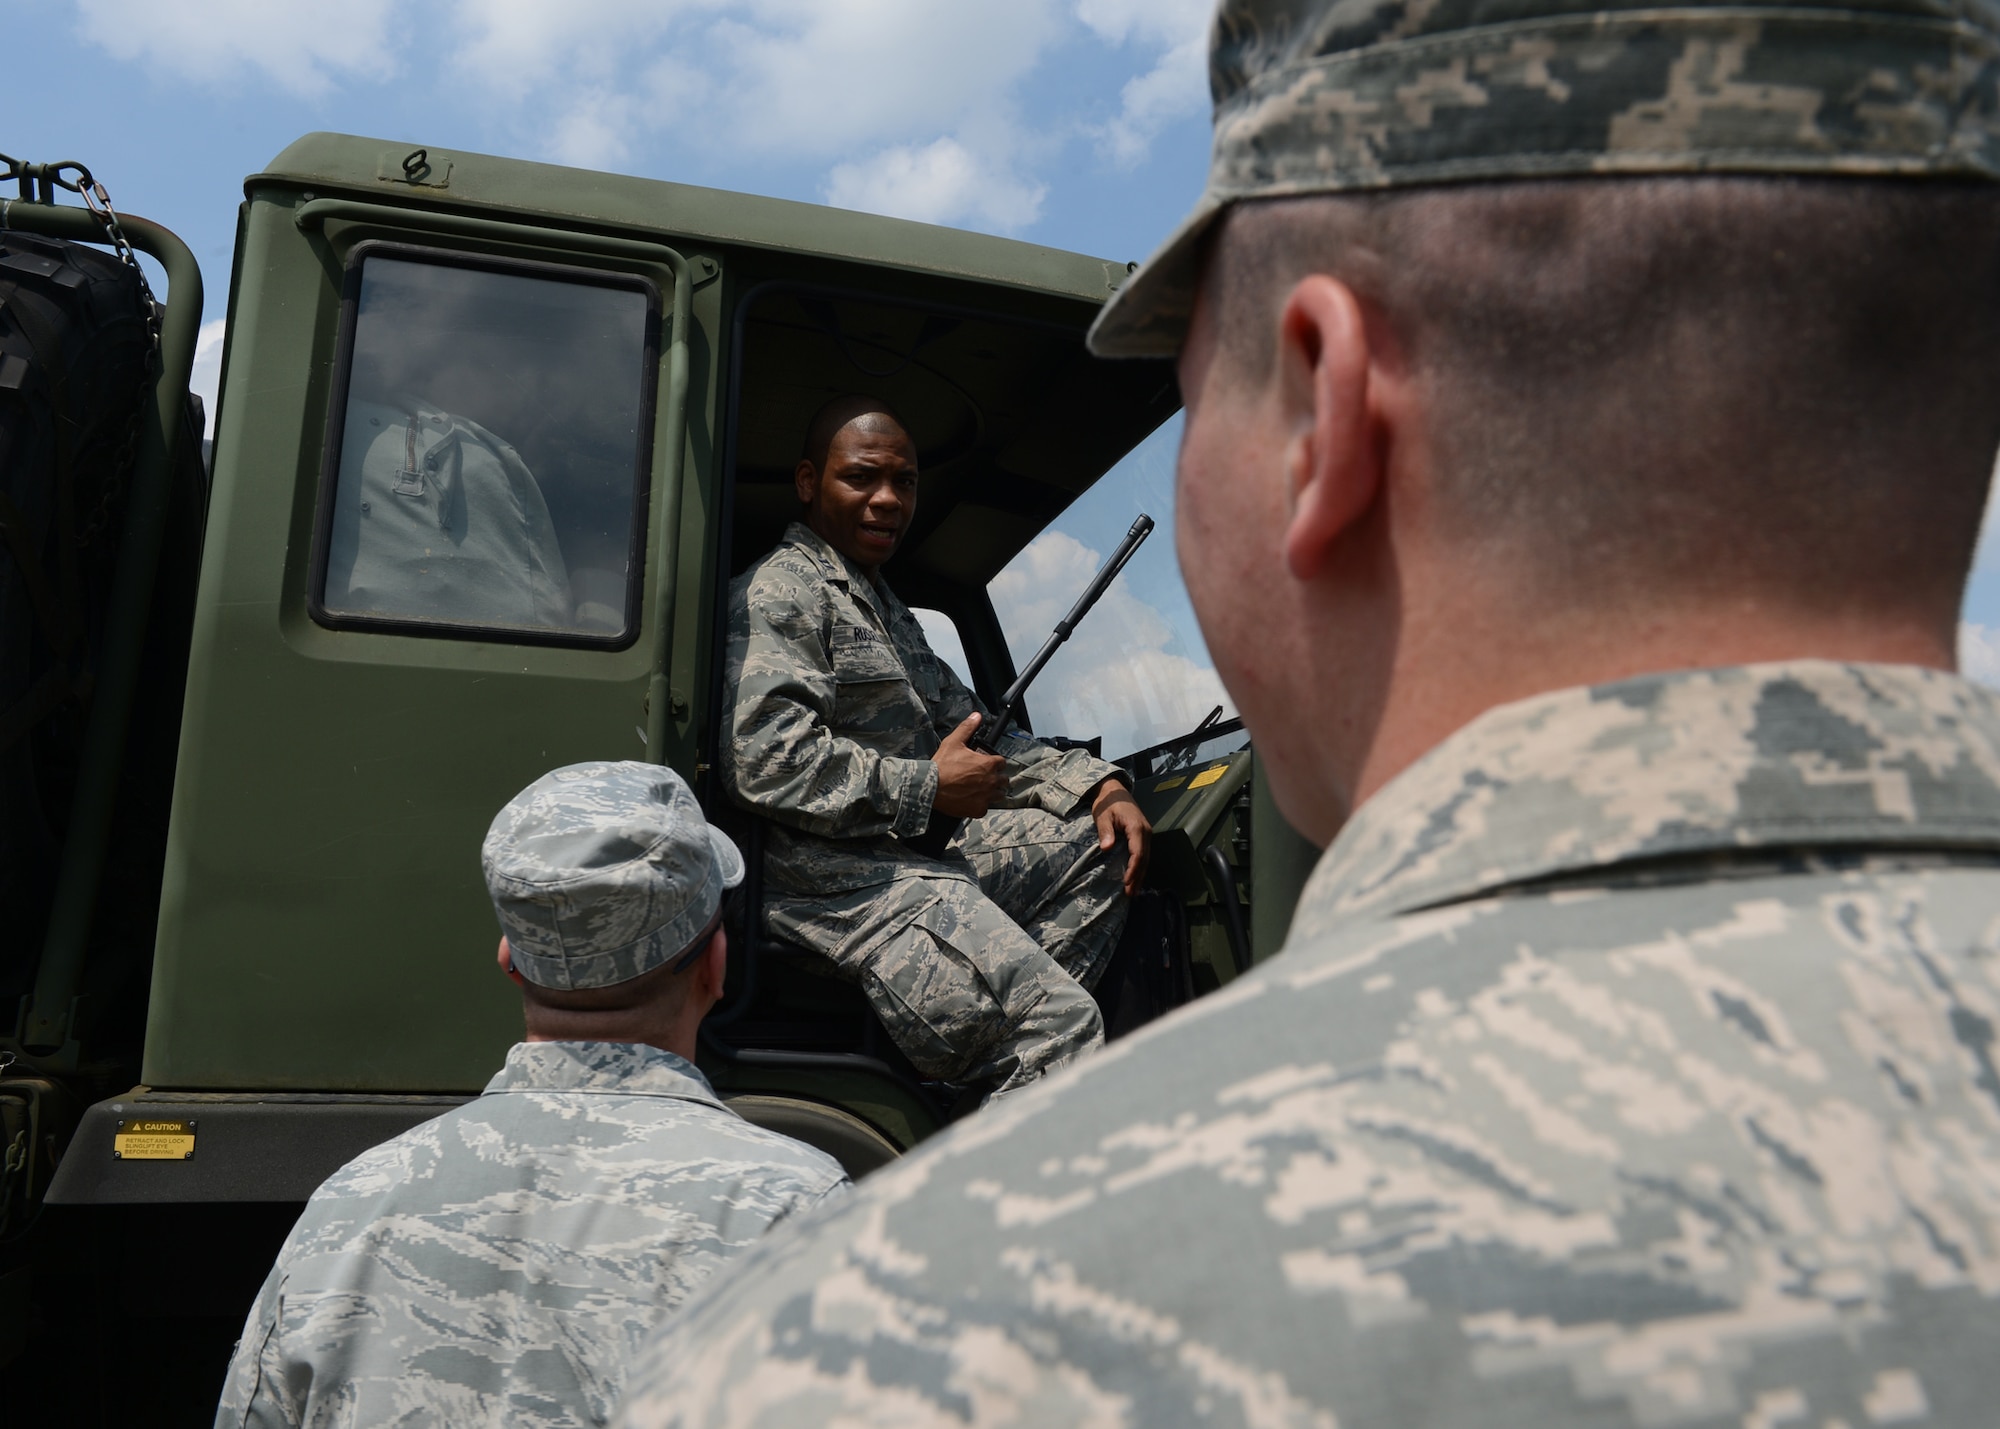 U.S. Air Force Senior Airman Bobby Gordon, 606th Air Control Squadron power production apprentice and U.S. Air Force Capt. Romaine Russell, 606th Air Control Squadron bravo convoy commander, gives instructions to U.S. Airmen during a stop in the second longest convoy in the history of the 606th ACS, June 2, 2014. Each vehicle in the convoy had at least two people, a driver and passenger, to safely drive long distances from Spangdahlem Air Base, Germany, to Powidz Air Base, Poland to provide air control support to NATO assets participating in Polish-led Exercise EAGLE TALON and U.S. Aviation Detachment Rotation 14-3. These training exercises aim to increase NATO partnership capacity for future real-world scenarios. (U.S. Air Force photo by Airman 1st Class Kyle Gese/Released)